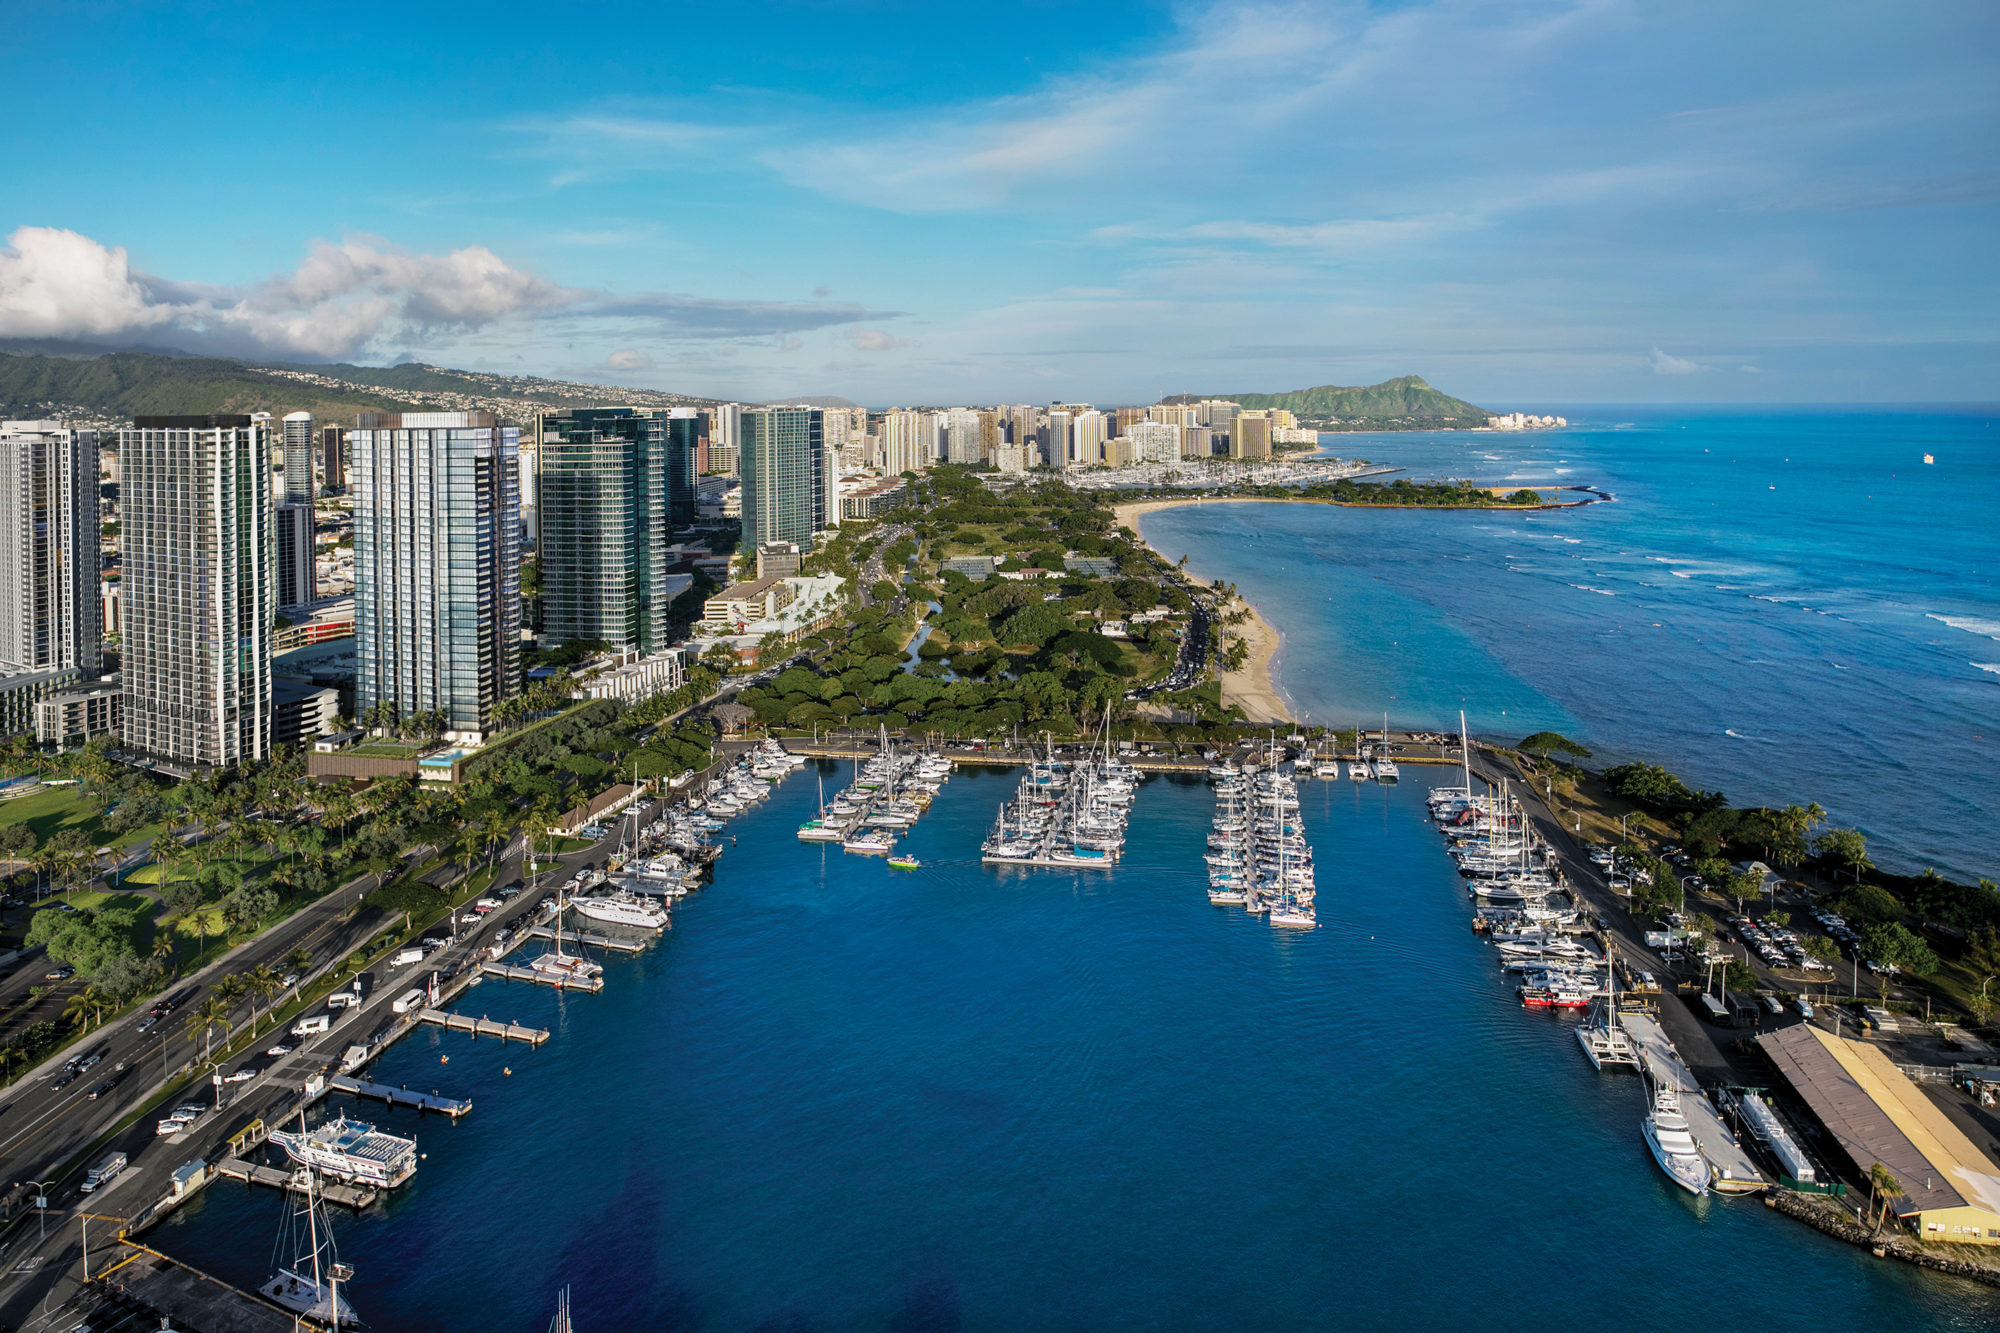 Aerial image of Victoria Place tower overlooking Kewalo Harbor, Ala Moana Beach Park, and Magic Island, with Waikiki and Diamond Head in the distance.